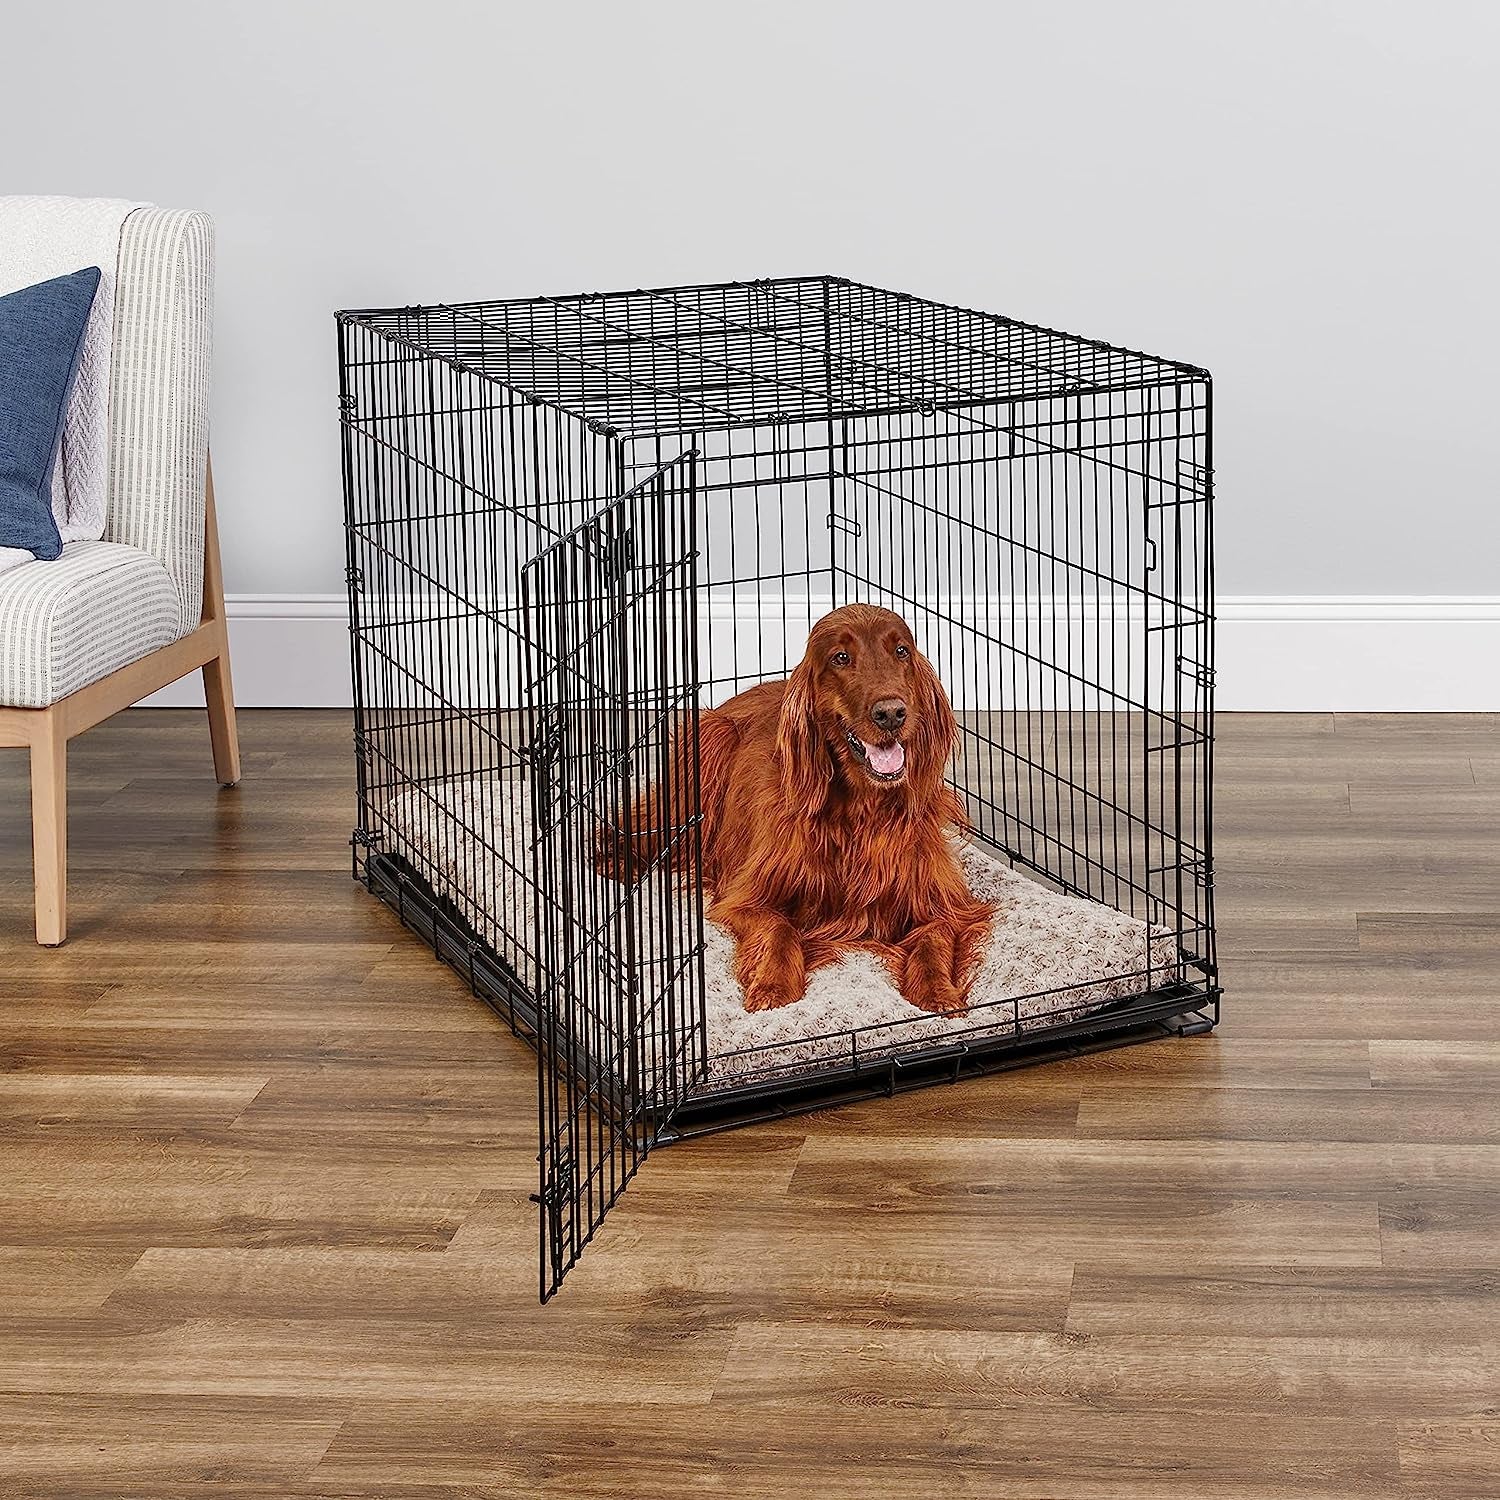 Newly Enhanced Single Door Icrate Dog Crate, Includes Leak-Proof Pan, Floor Protecting Feet, Divider Panel & New Patented Features